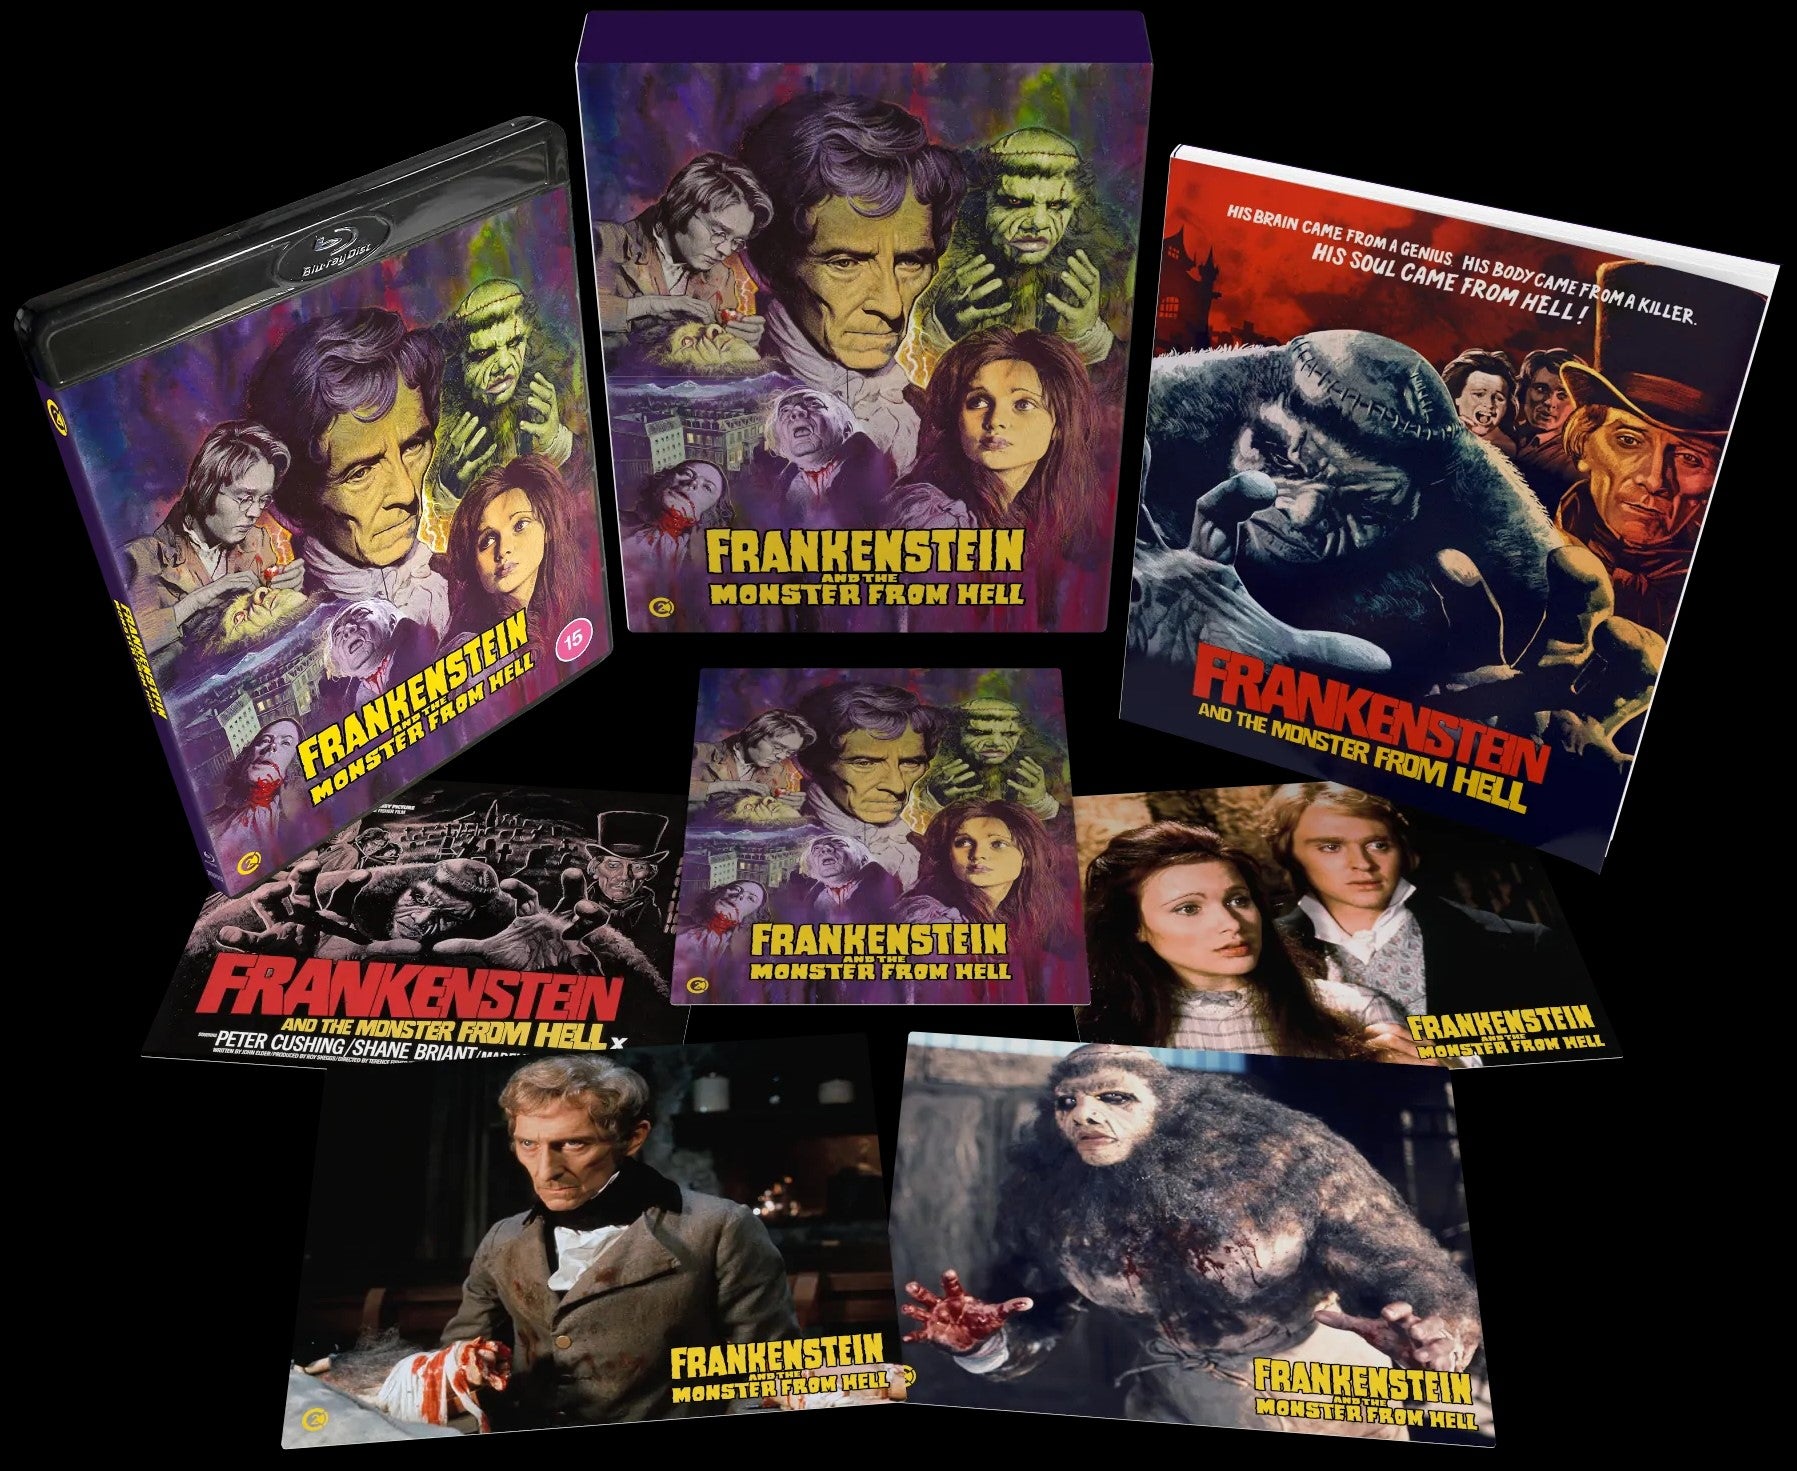 FRANKENSTEIN AND THE MONSTER FROM HELL (REGION B IMPORT - LIMITED EDITION) BLU-RAY